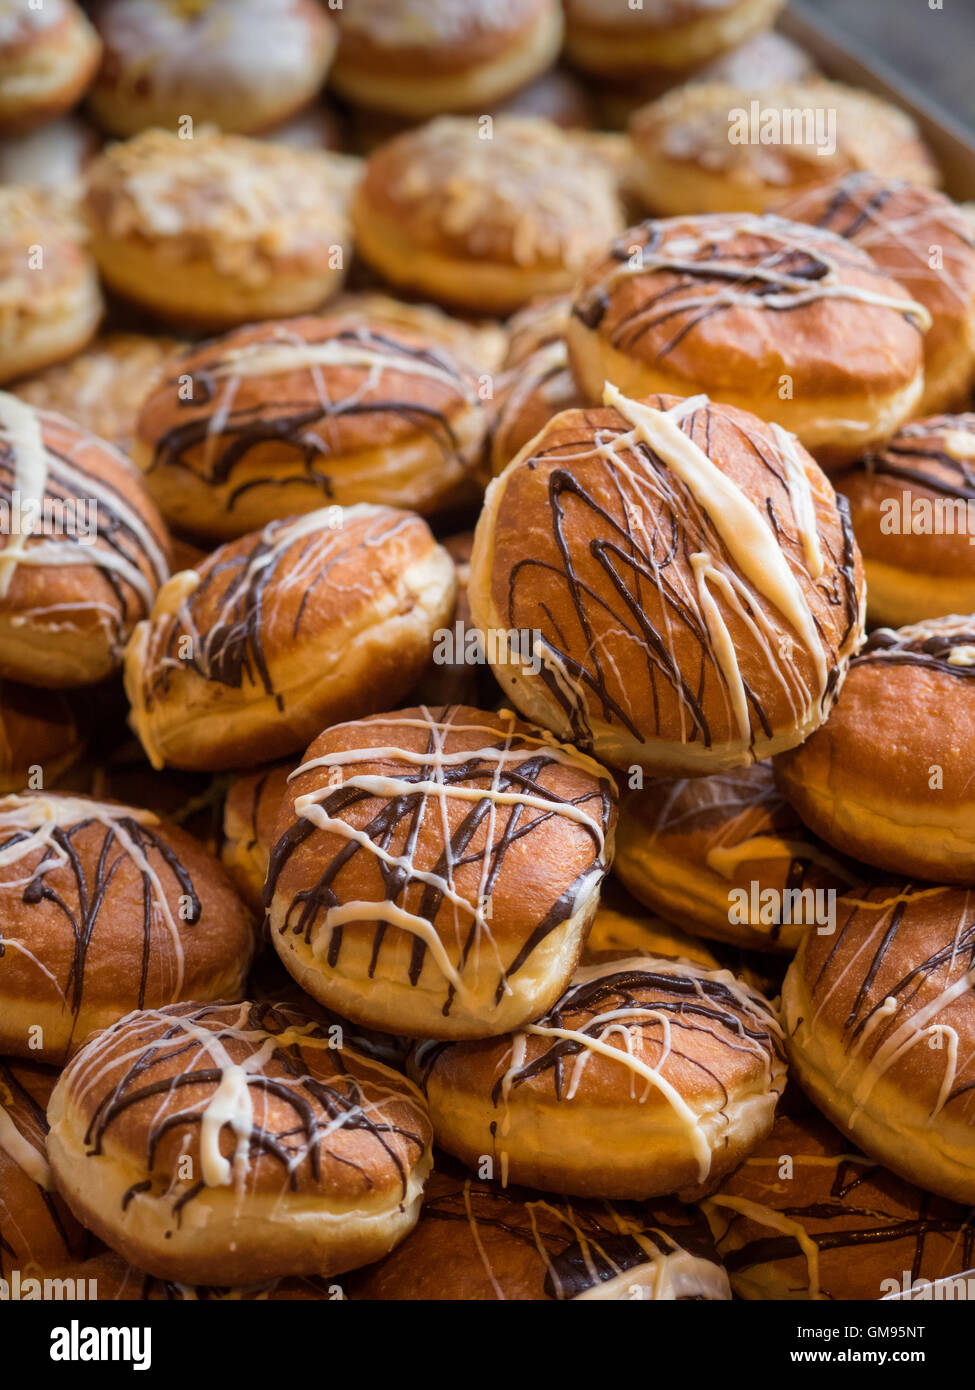 Freshly made sweet doughnuts on sale at the Borough market in London Stock Photo